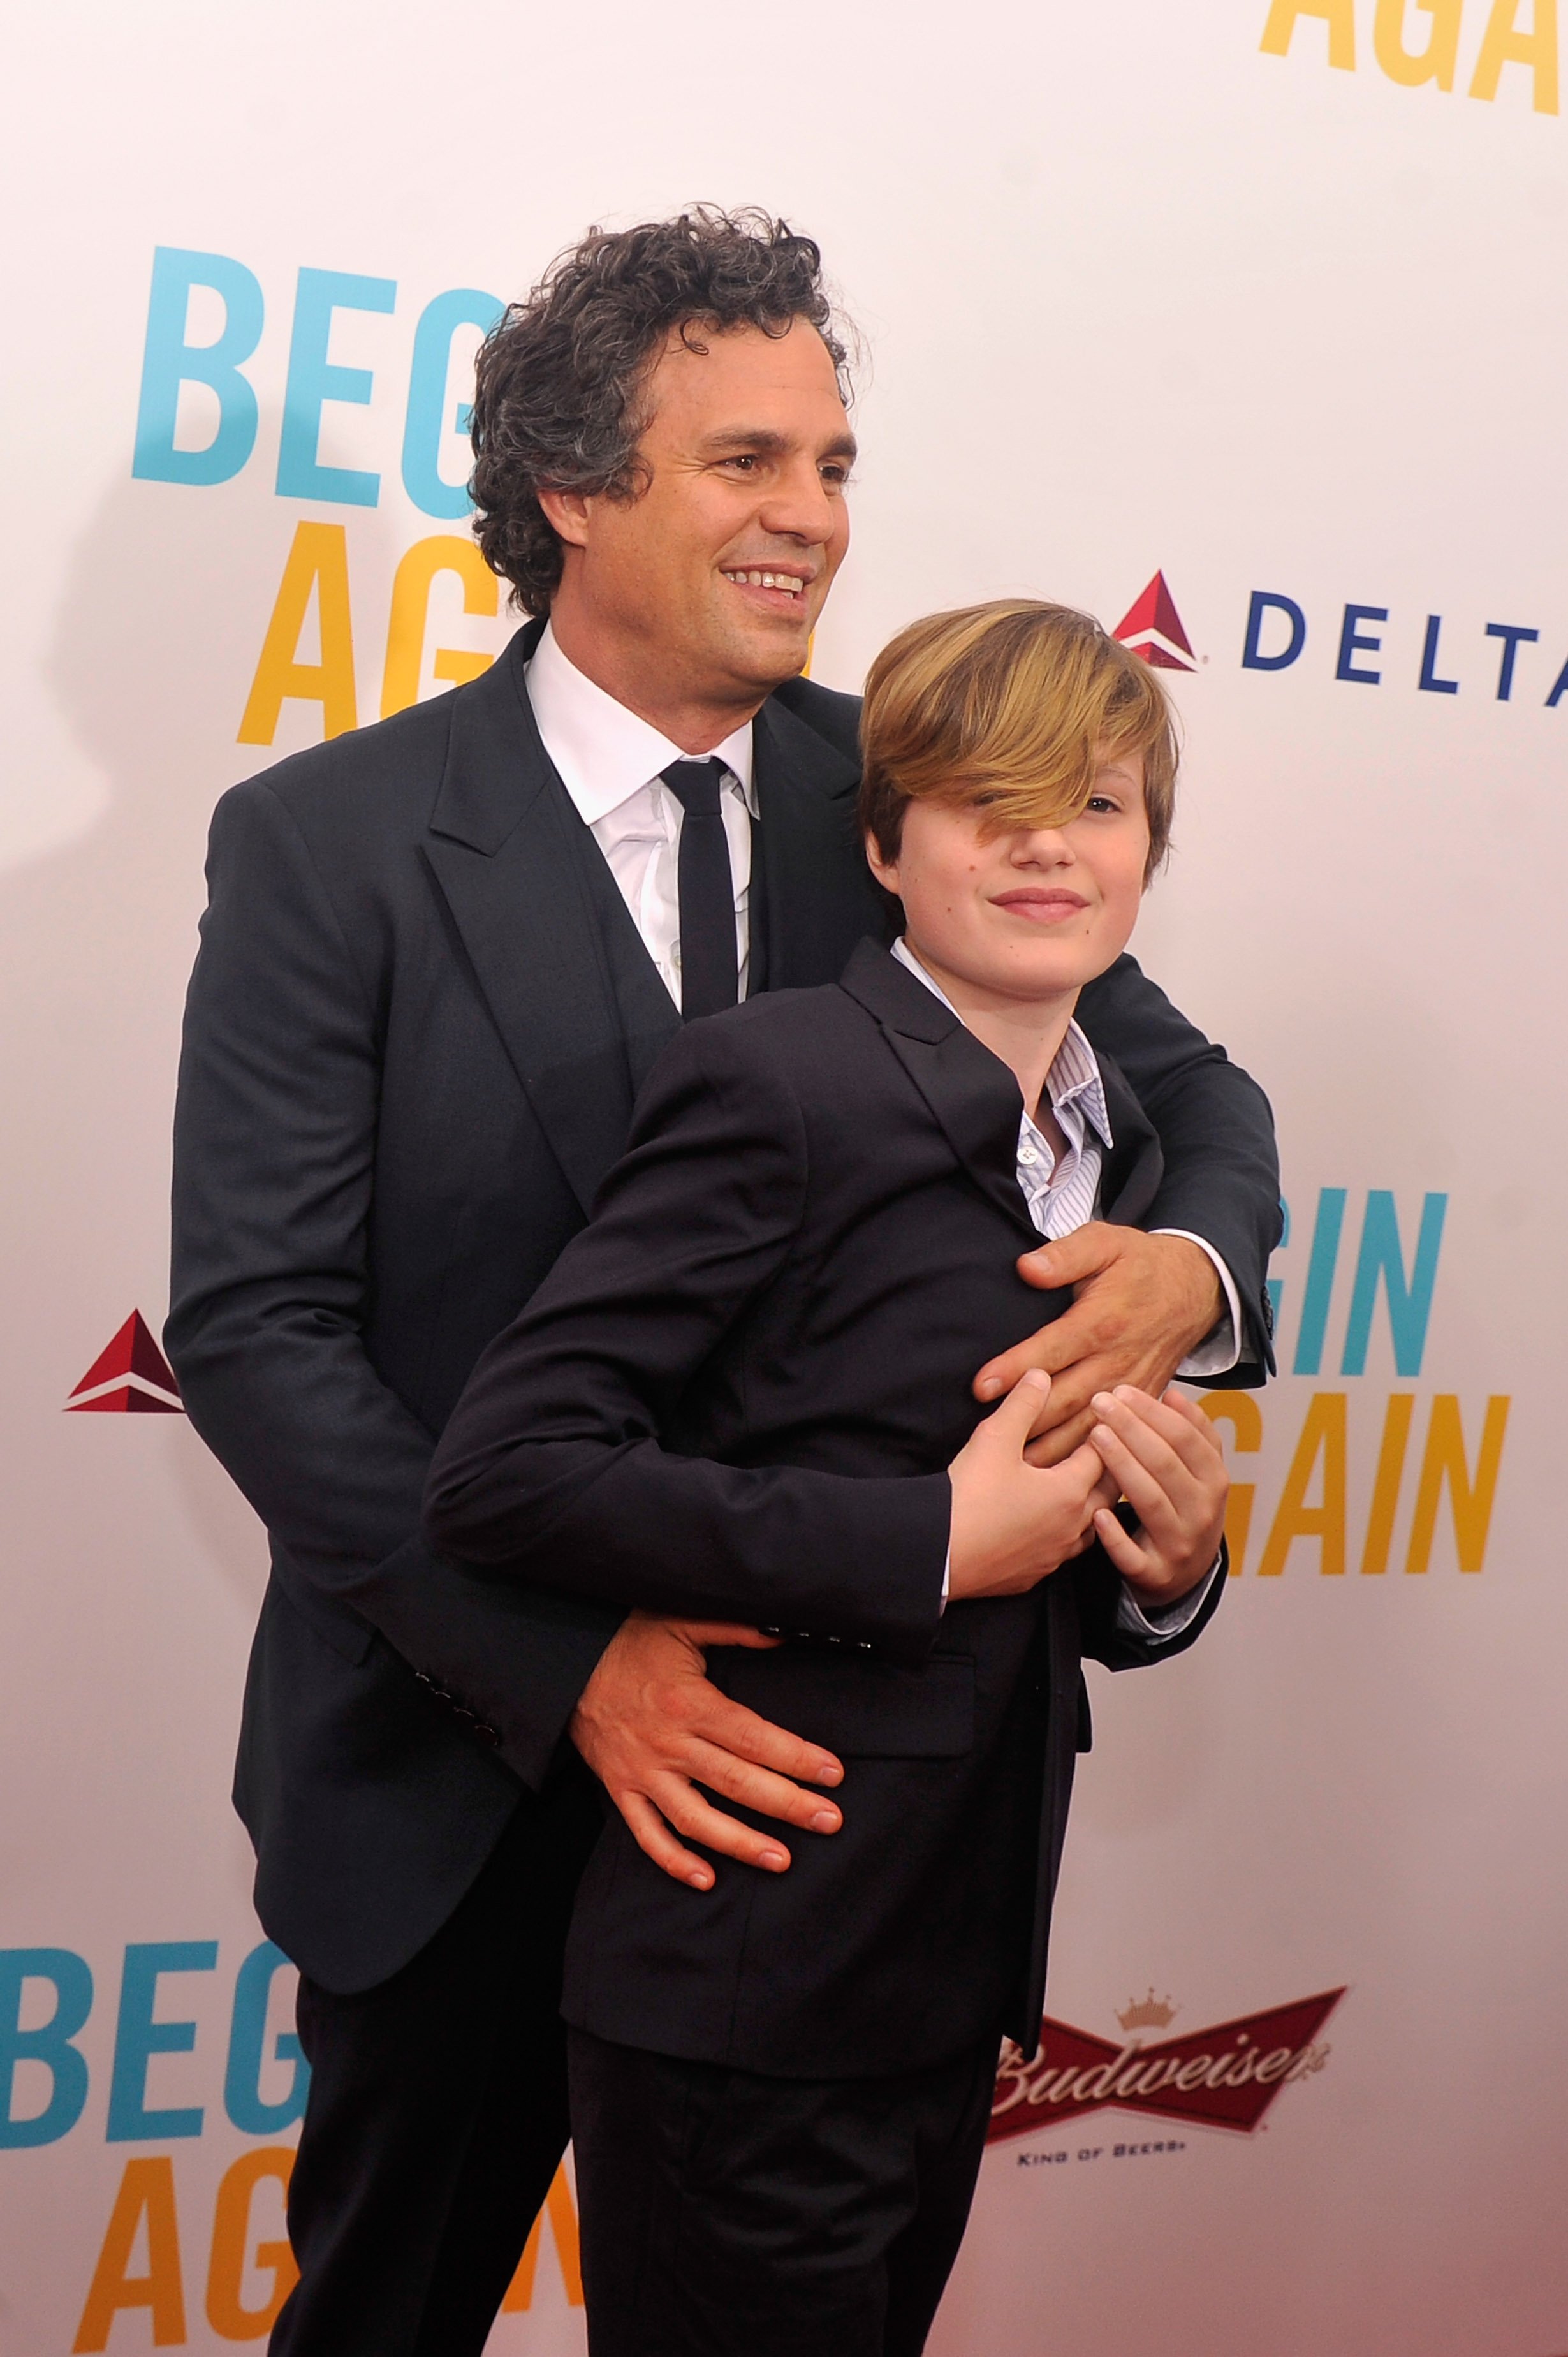 Actor Mark Ruffalo and son Keen Ruffalo at the New York premiere "BEGIN AGAIN," at SVA Theater on June 25, 2014, in New York City. | Source: Getty Images